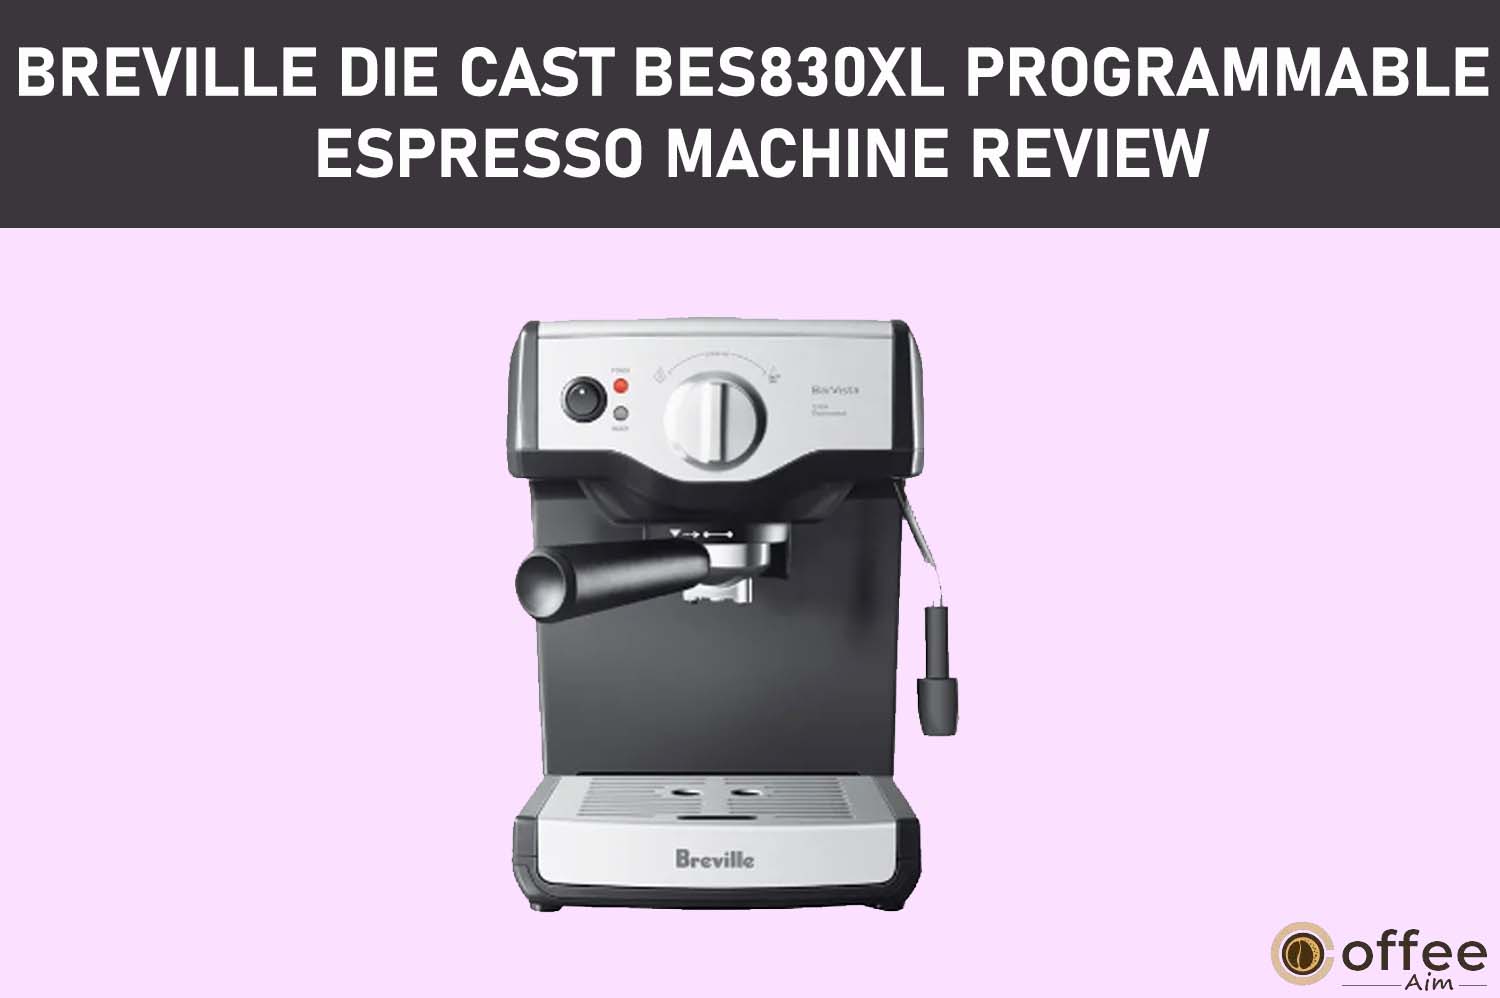 Featured image for the article "Breville Die Cast BES830XL Programmable Espresso Machine Review"